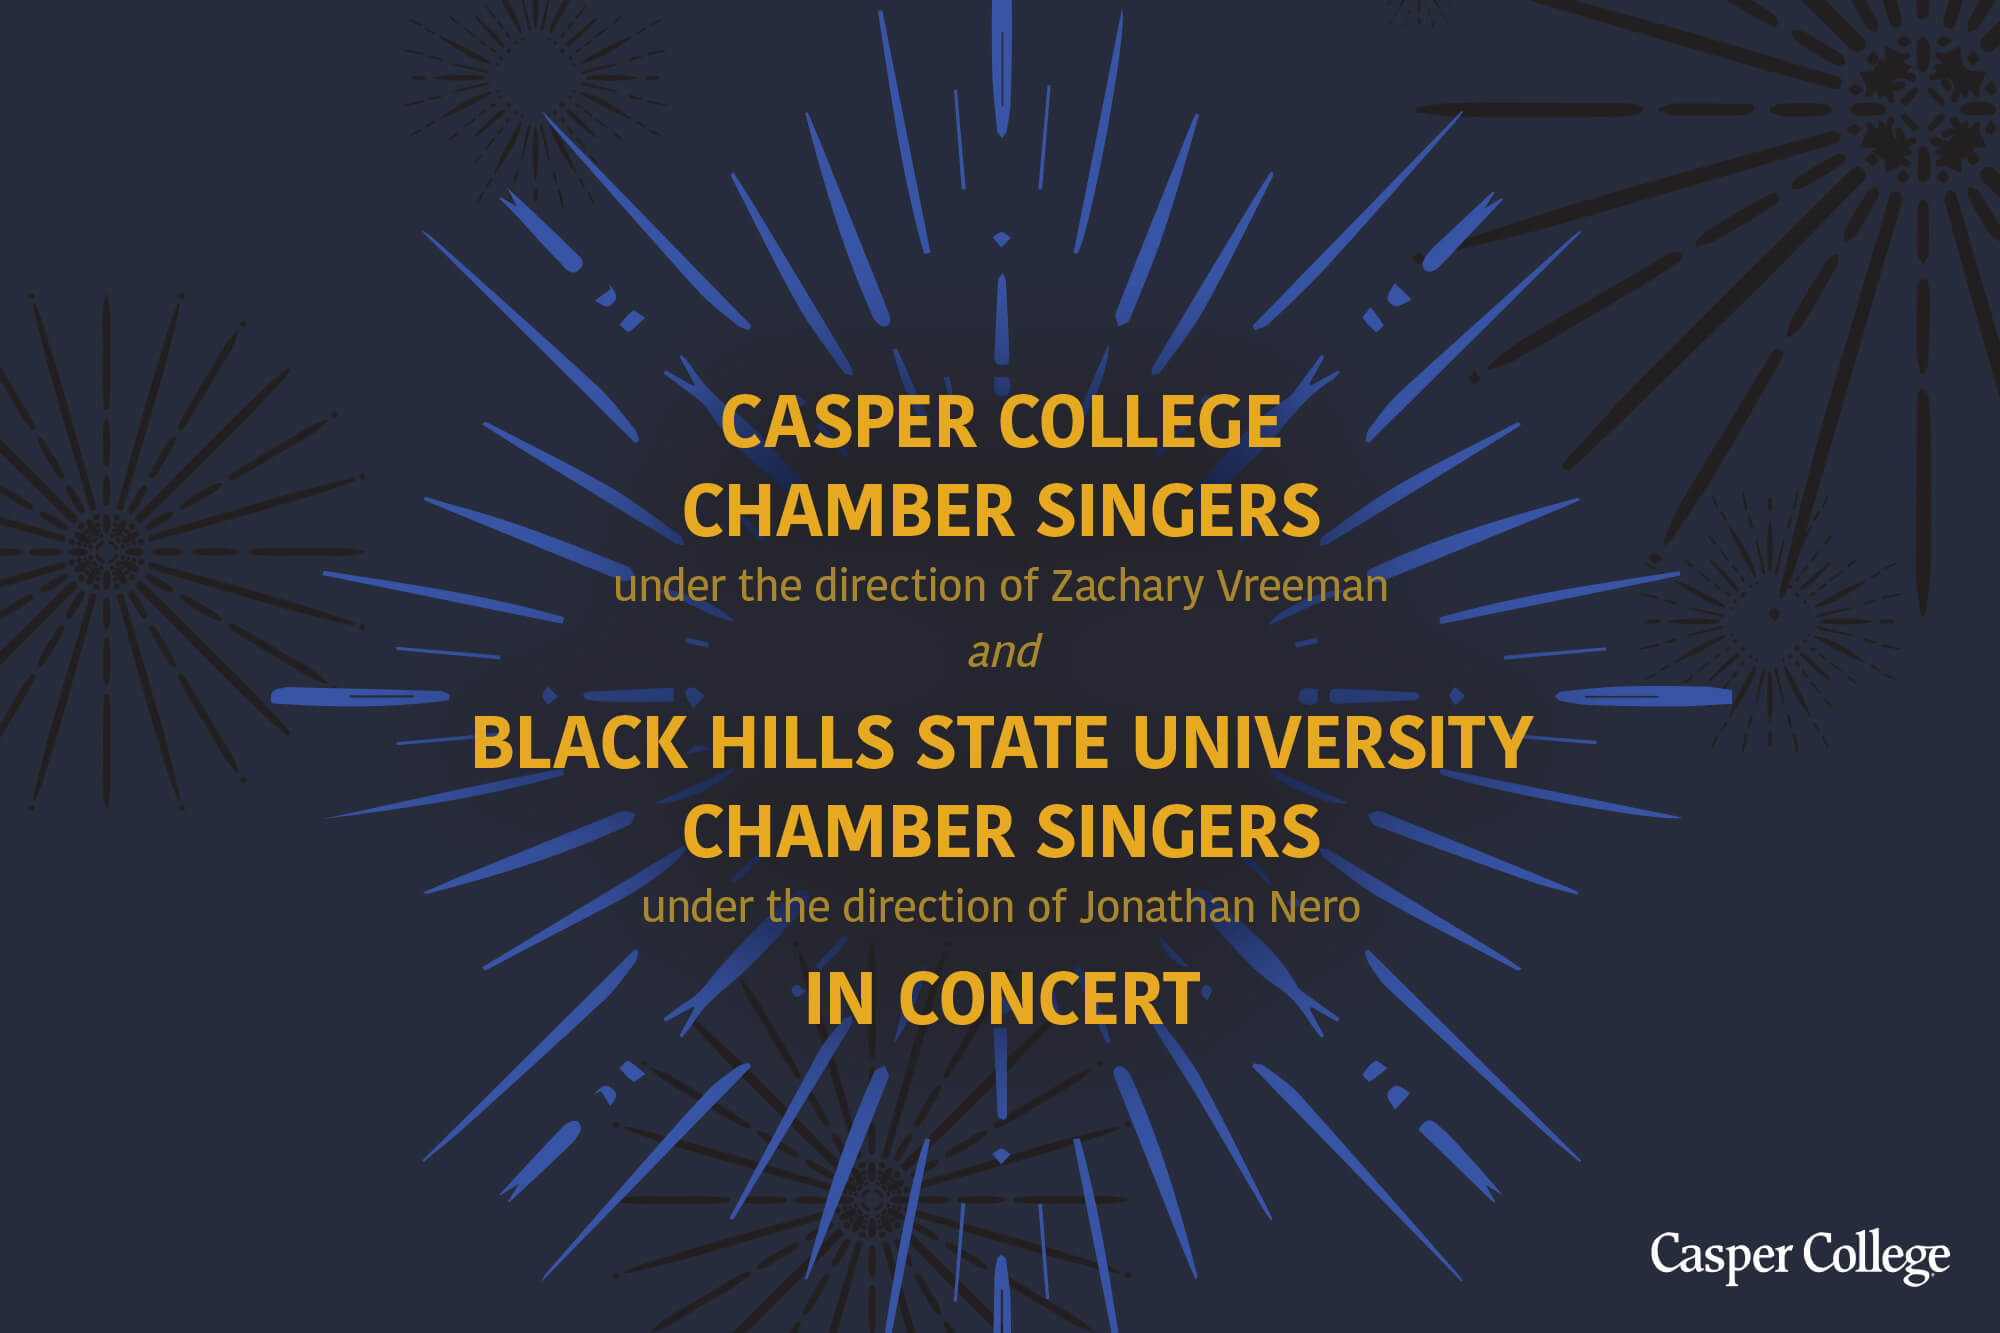 Image for "CC Chamber Singers joined by BHSU Chamber Singers April 17 in concert" press release.